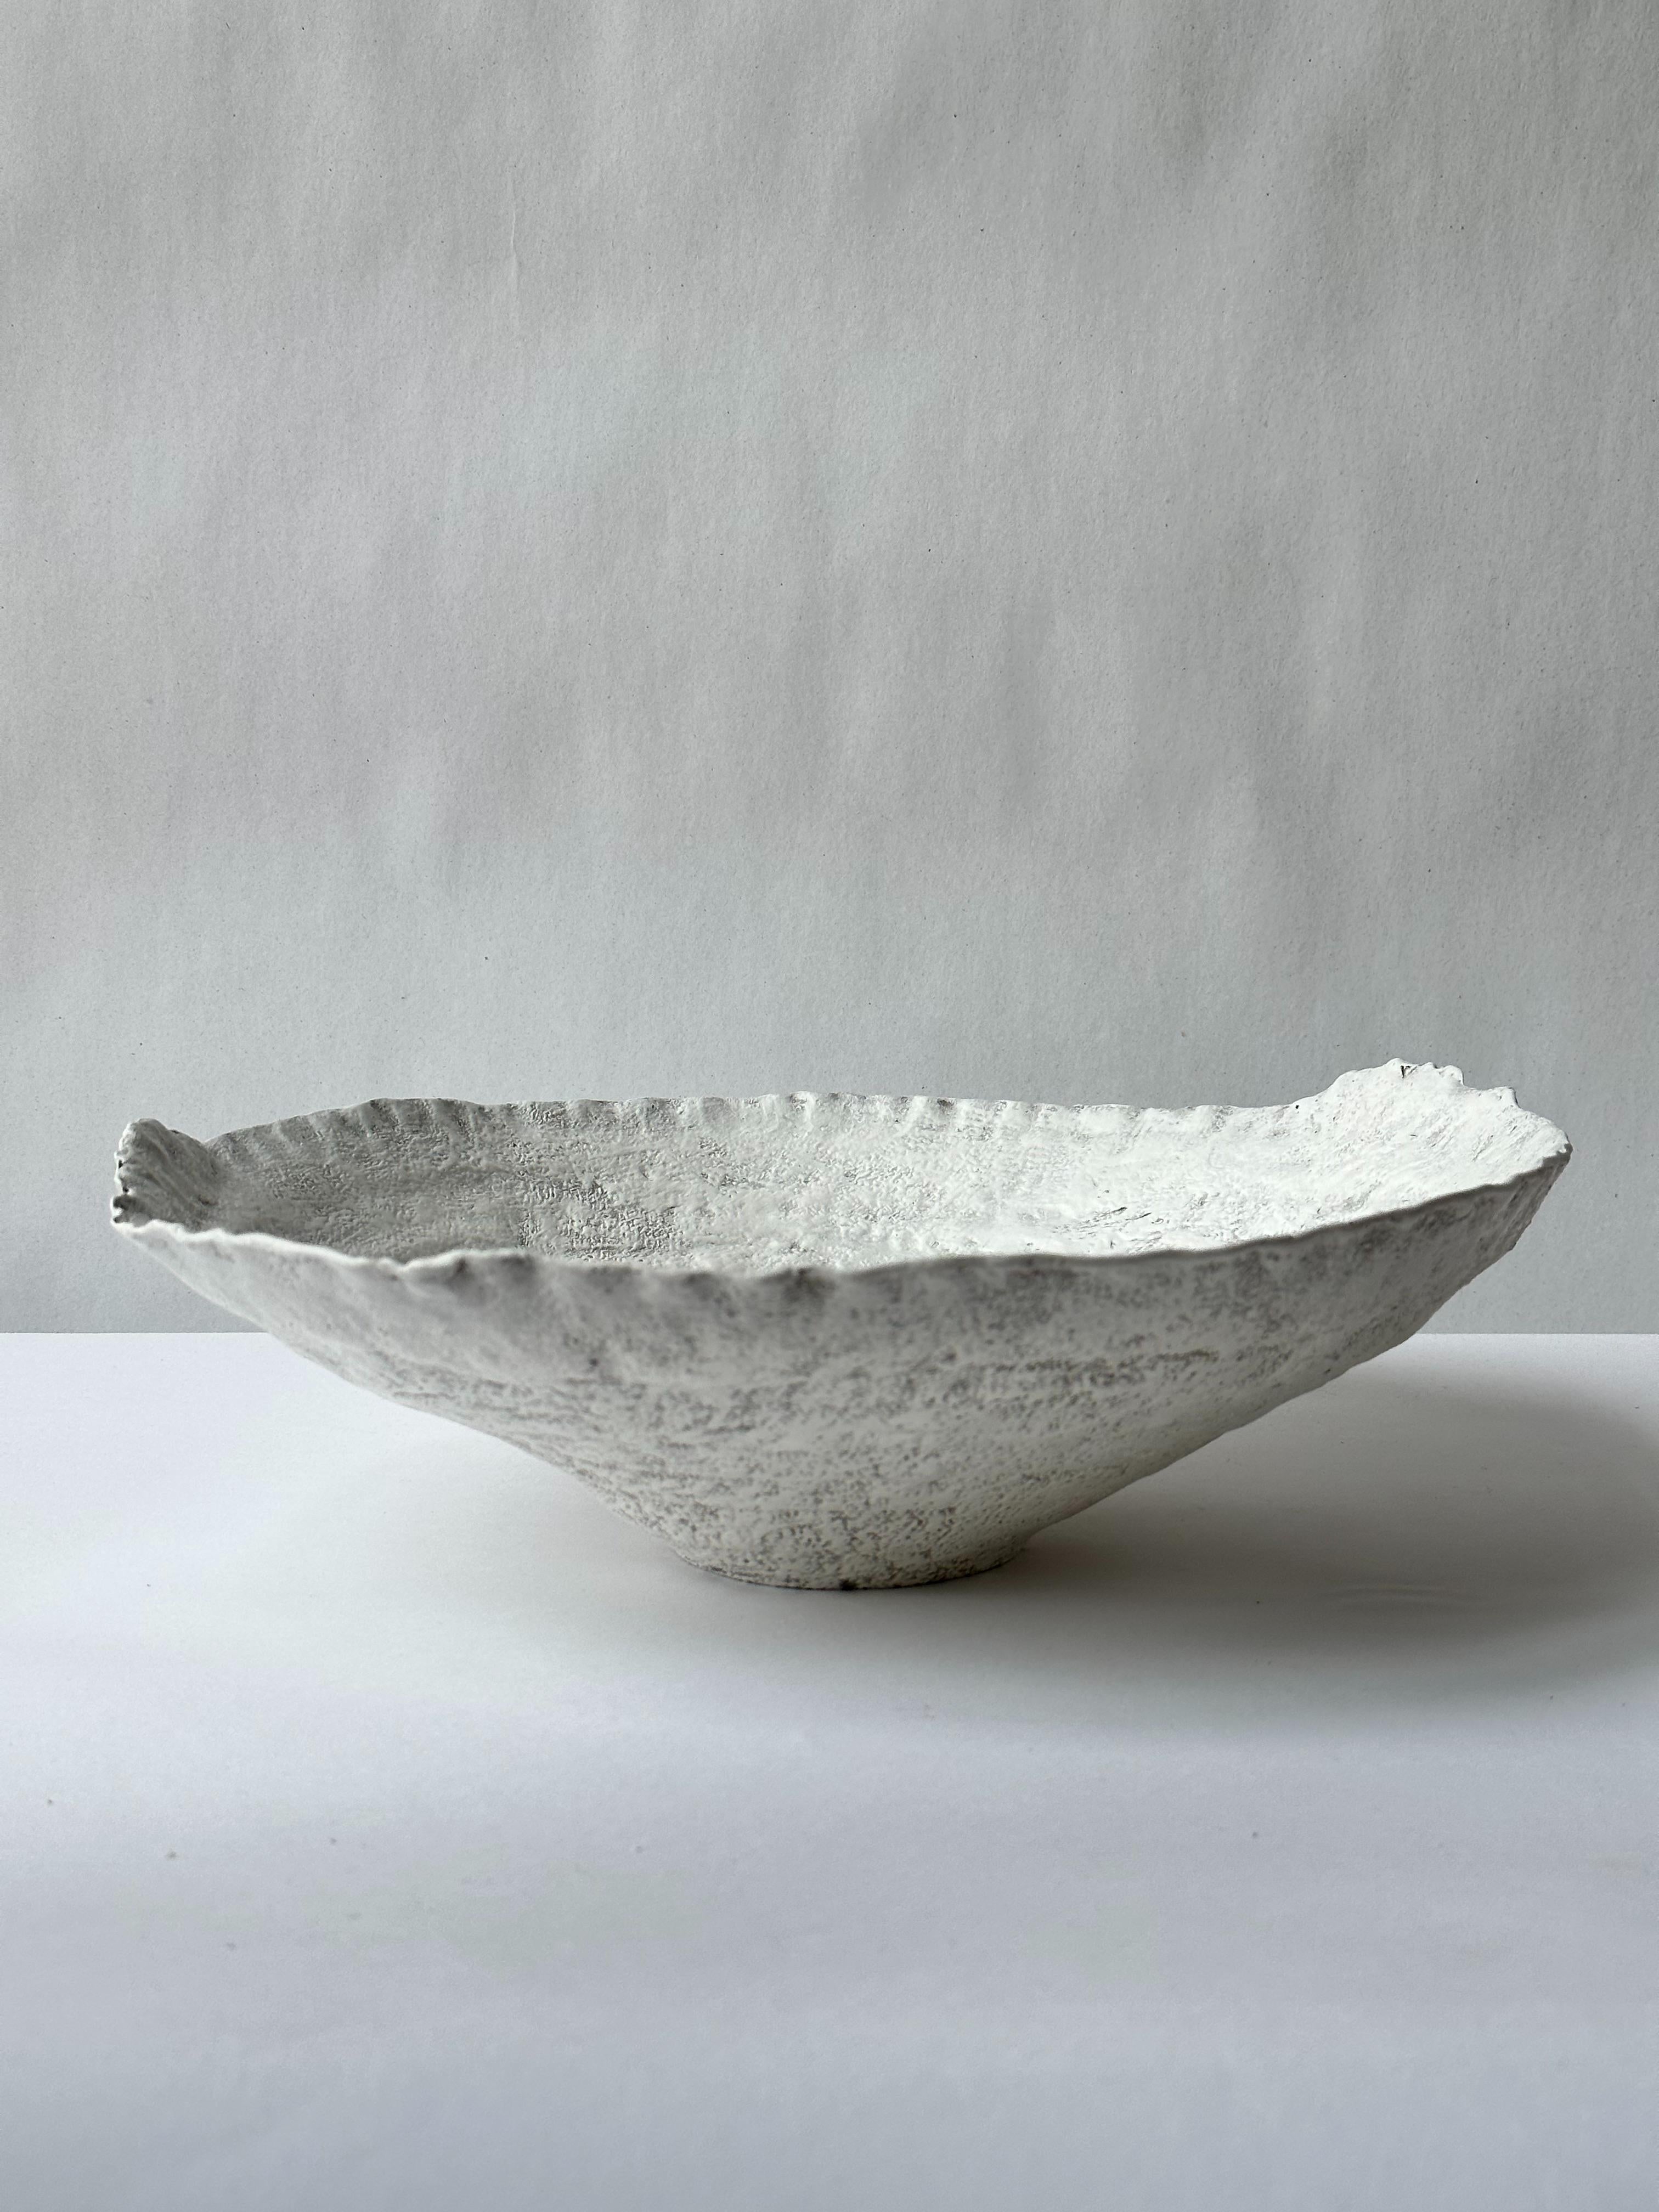 Grey Stoneware Symposio Bowl by Elena Vasilantonaki
Unique
Dimensions: ⌀ 34 x H 10 cm (Dimensions may vary)
Materials: Stoneware
Available finishes: Black, White, Brown, Red, White patina

Growing up in Greece I was surrounded by pottery forms that